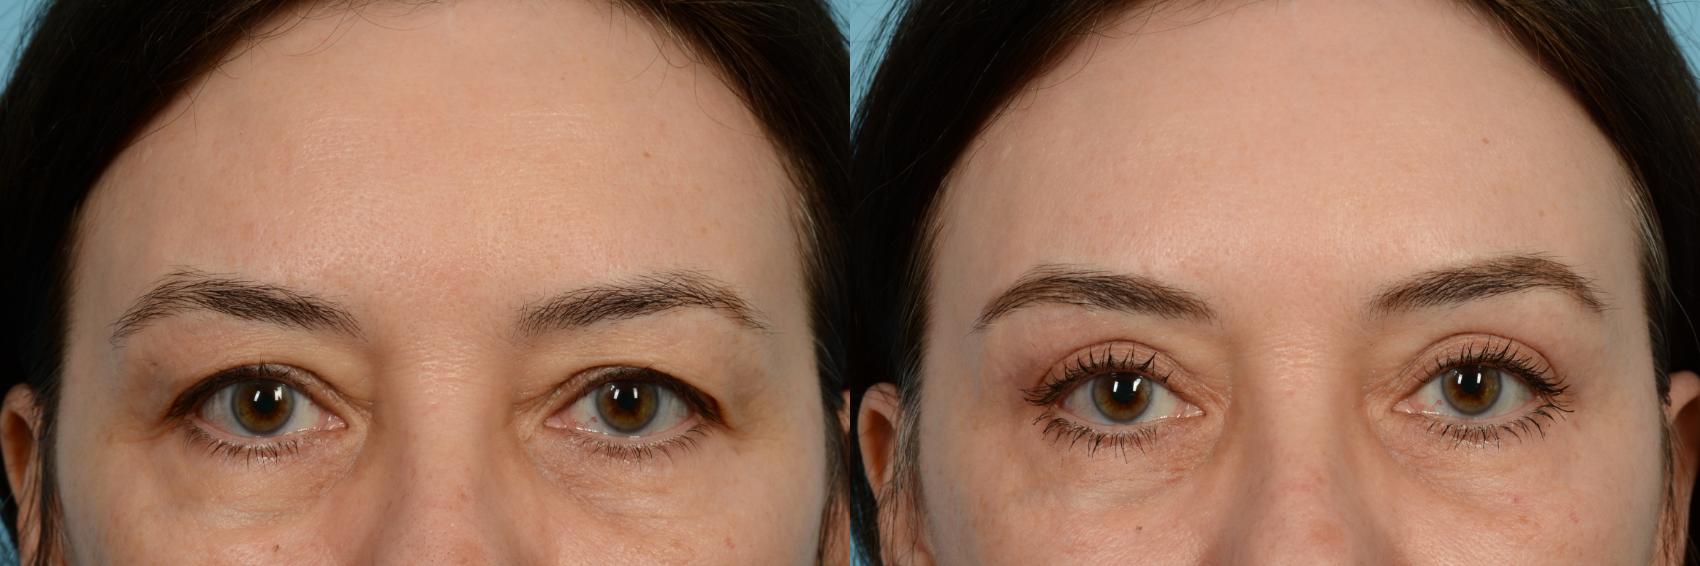 Eye Bags Surgery for Ethnic Skin  Puffy Eyes New York Cosmetic Surgery